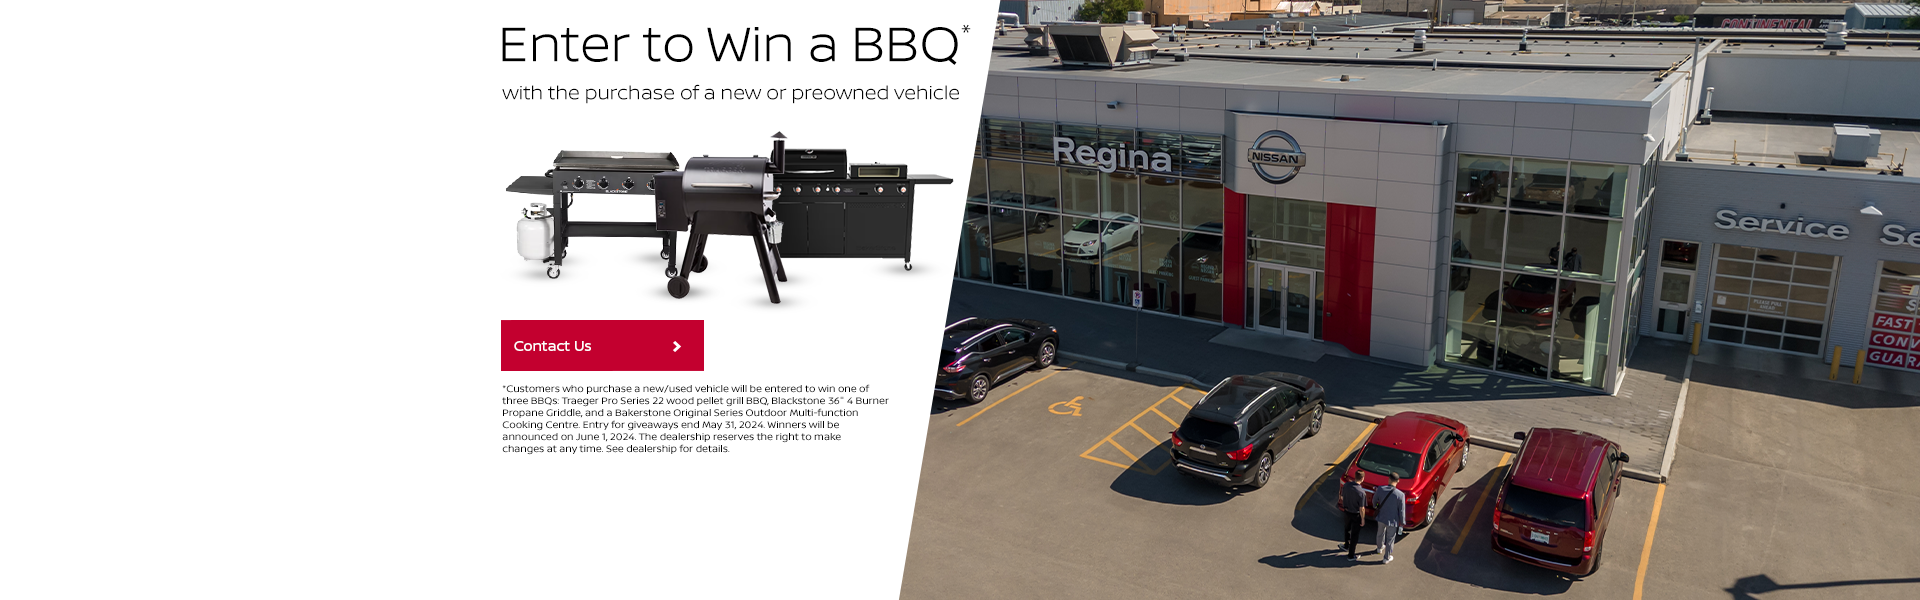 May Giveaway - BBQ Package